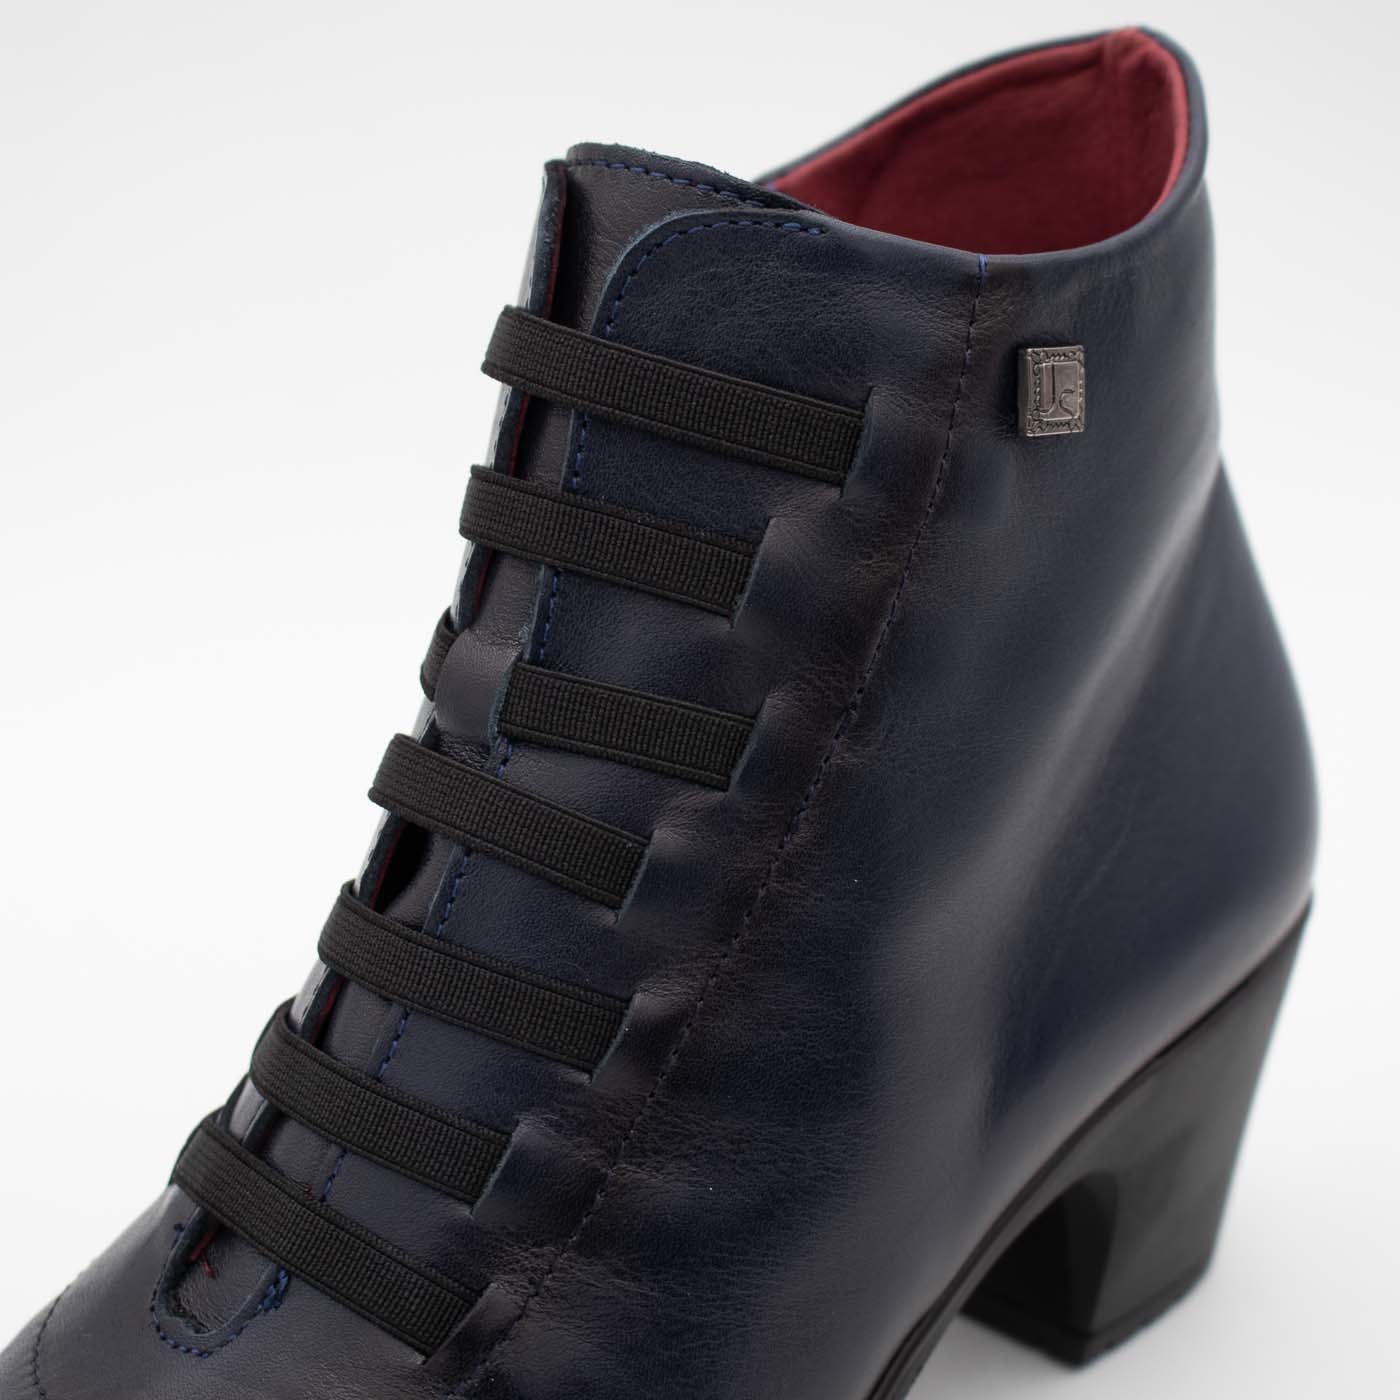 Side profile of Jose Saenz navy smooth leather ankle boot.